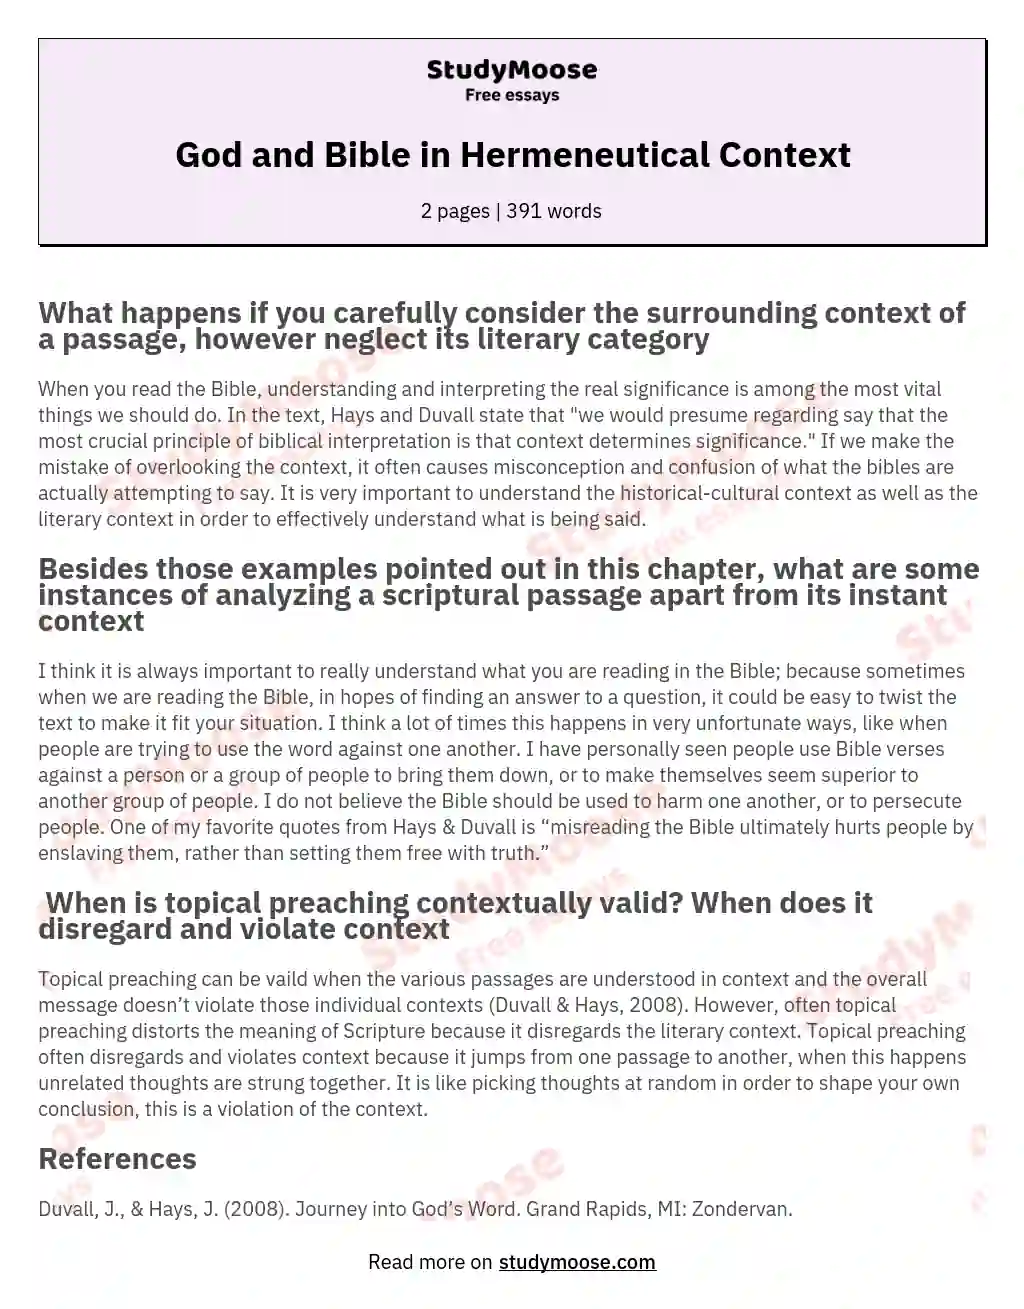 God and Bible in Hermeneutical Context essay